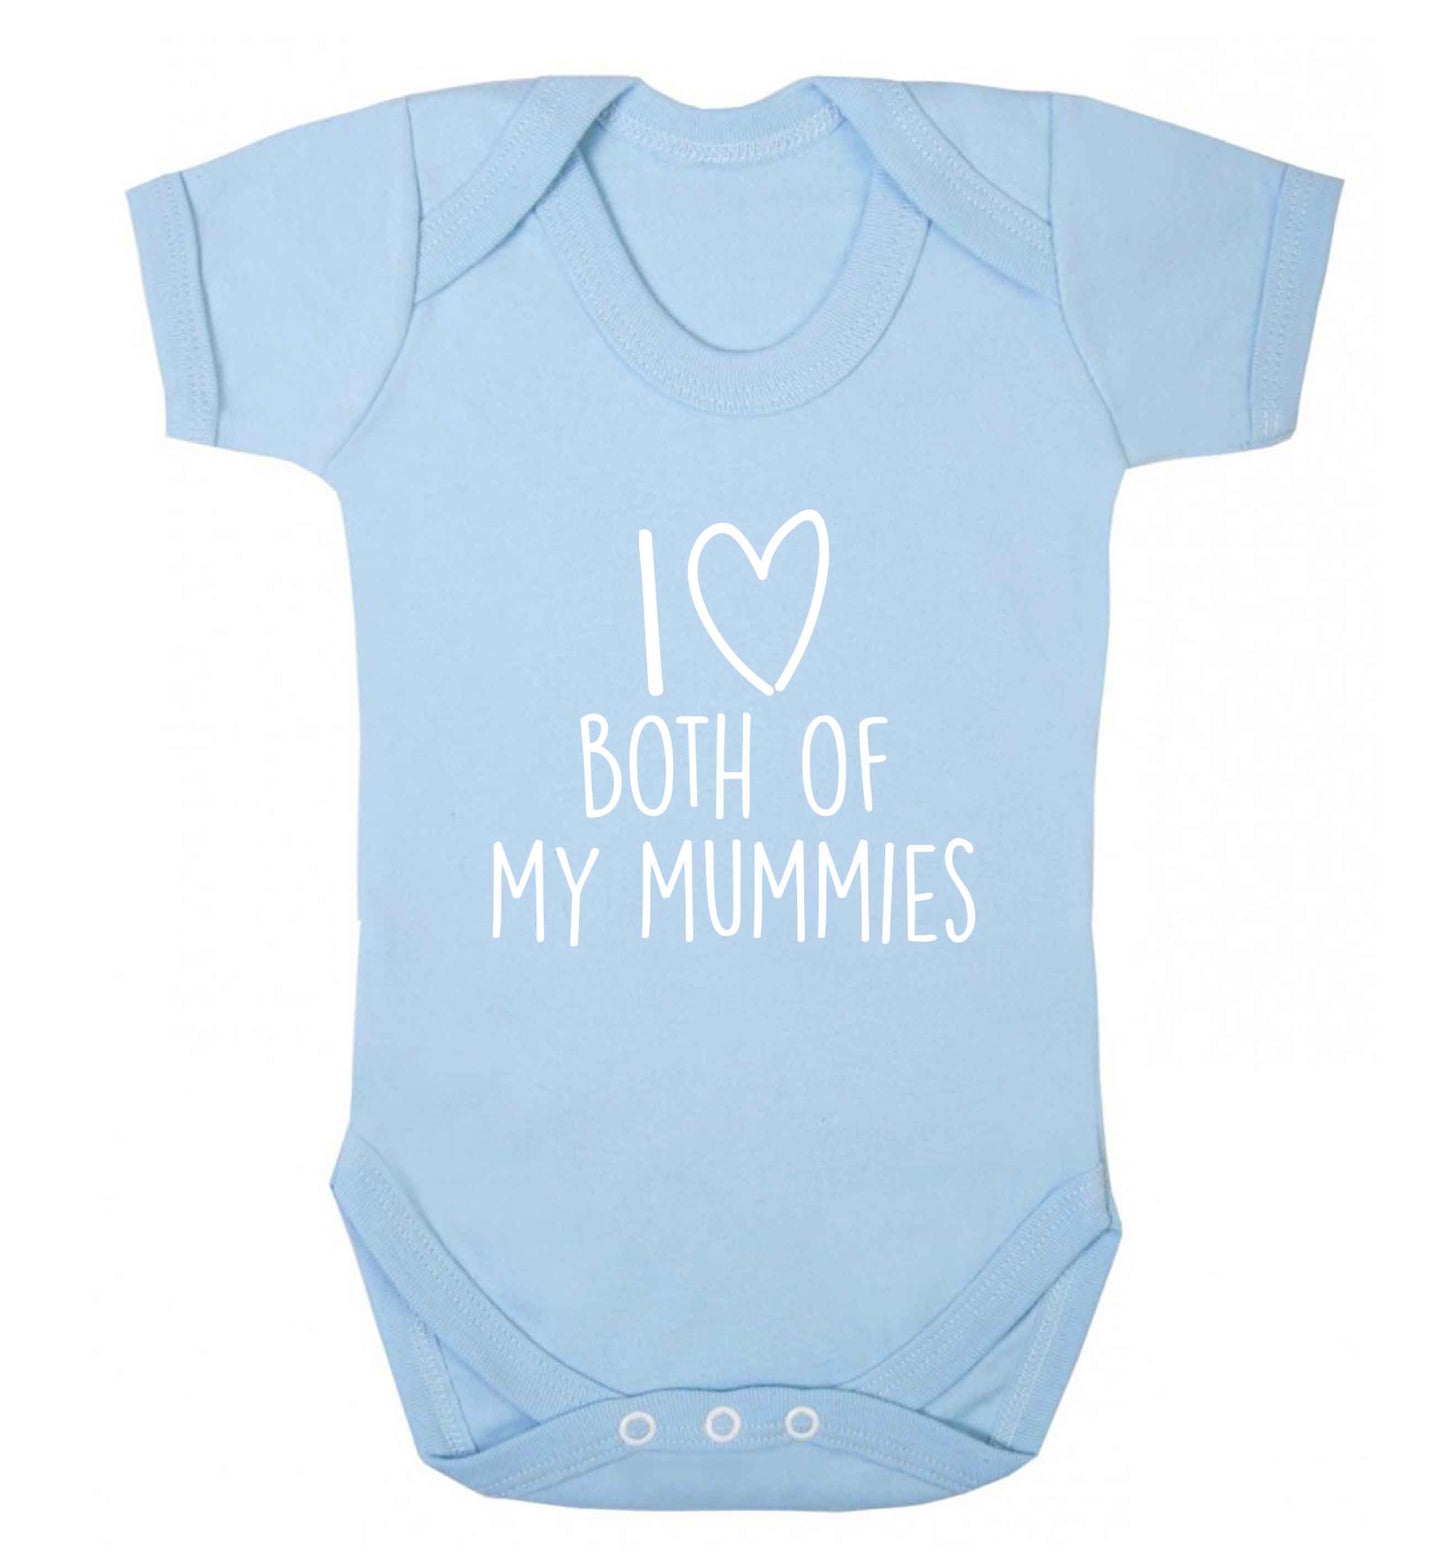 I love both of my mummies baby vest pale blue 18-24 months